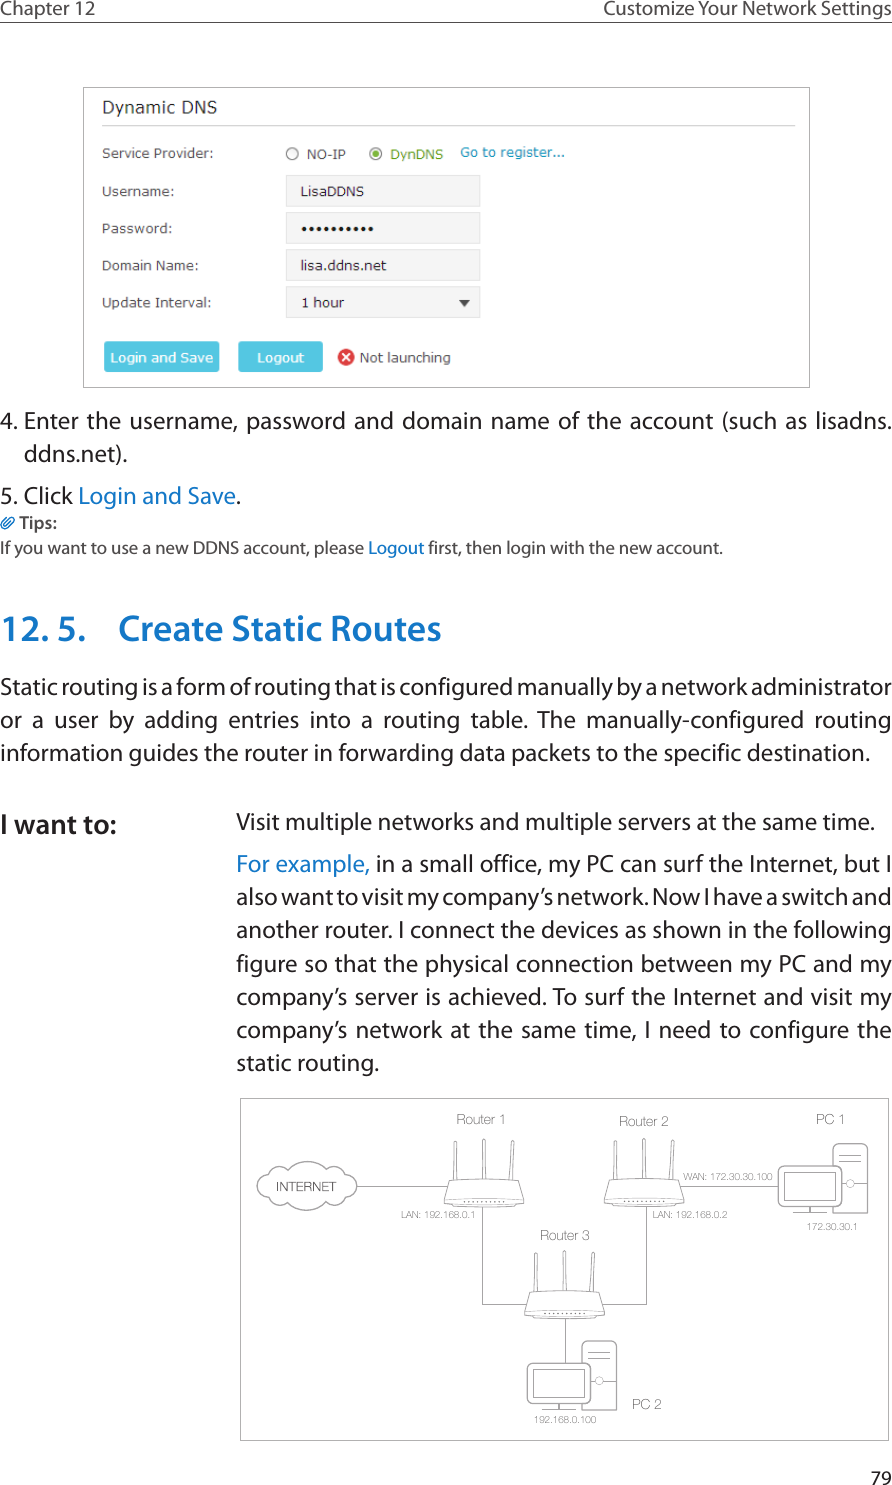 79Chapter 12 Customize Your Network Settings4. Enter the username, password and domain name of the account (such as lisadns.ddns.net).5. Click Login and Save.Tips: If you want to use a new DDNS account, please Logout first, then login with the new account.12. 5.  Create Static RoutesStatic routing is a form of routing that is configured manually by a network administrator or a user by adding entries into a routing table. The manually-configured routing information guides the router in forwarding data packets to the specific destination.Visit multiple networks and multiple servers at the same time.For example, in a small office, my PC can surf the Internet, but I also want to visit my company’s network. Now I have a switch and another router. I connect the devices as shown in the following figure so that the physical connection between my PC and my company’s server is achieved. To surf the Internet and visit my company’s network at the same time, I need to configure the static routing.PC 1PC 2Router 2Router 1Router 3LAN: 192.168.0.1192.168.0.100LAN: 192.168.0.2WAN: 172.30.30.100172.30.30.1I want to: